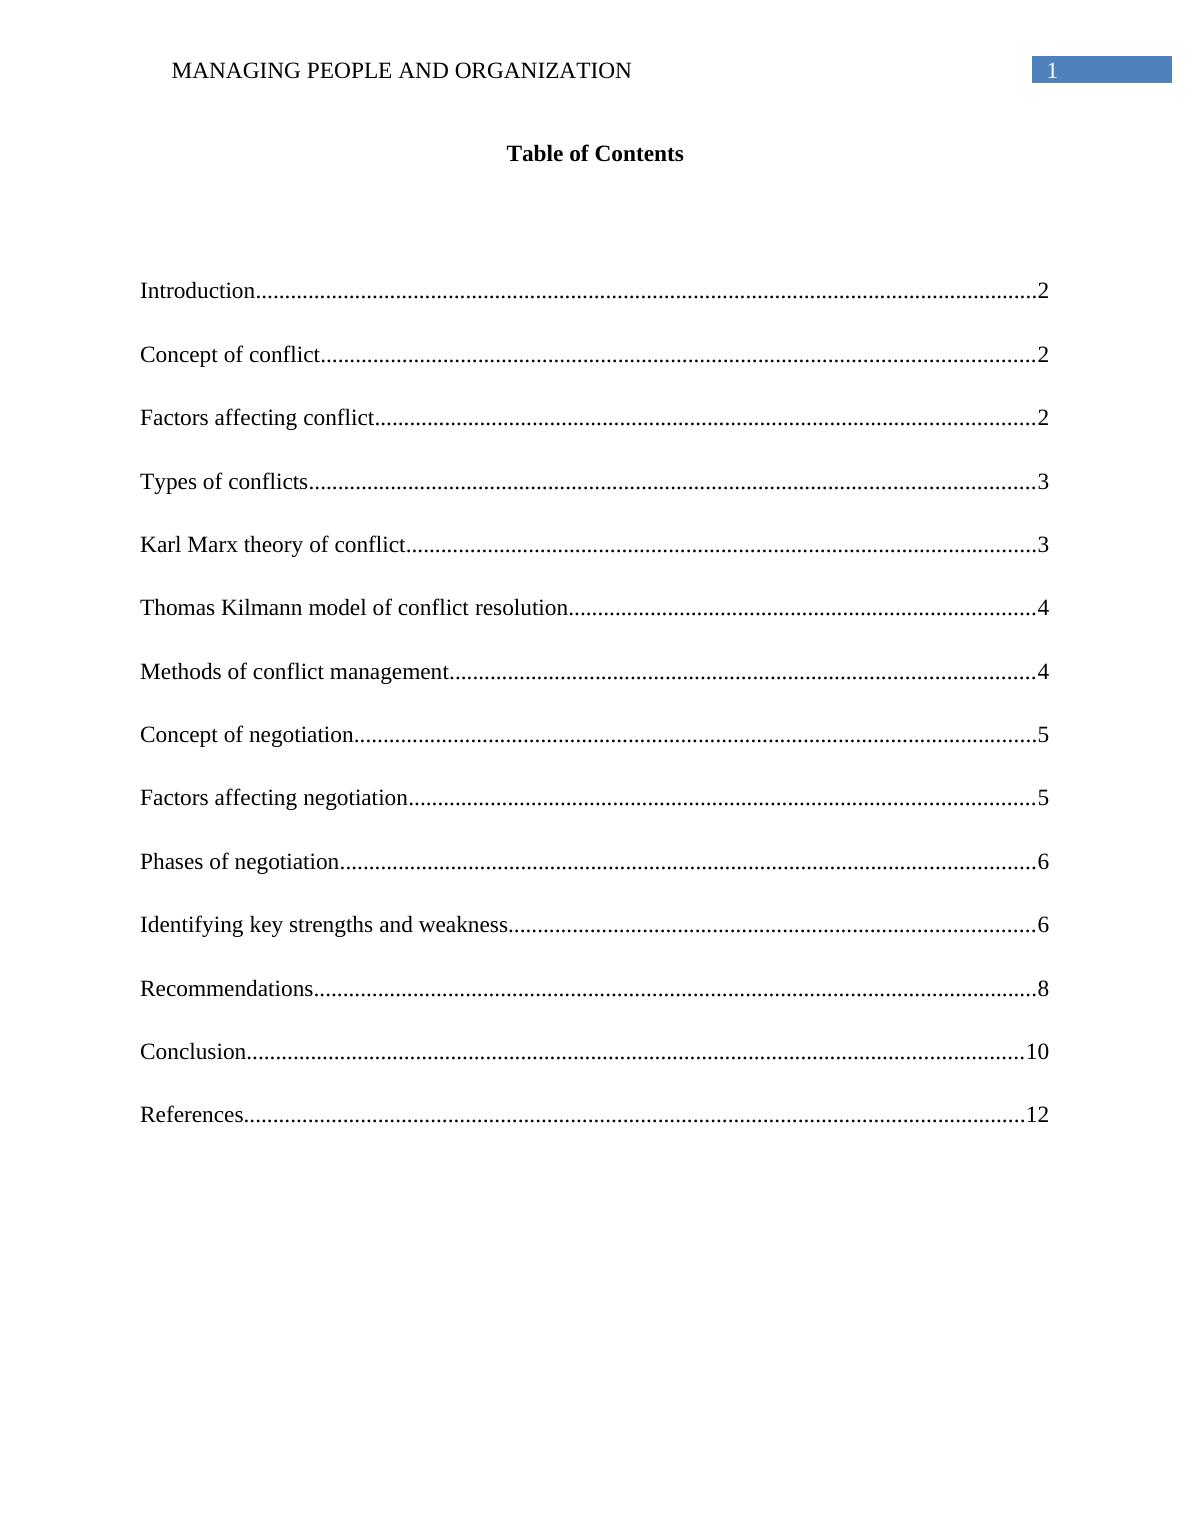 MGMT20129 Managing People and Organizations Assignment_2